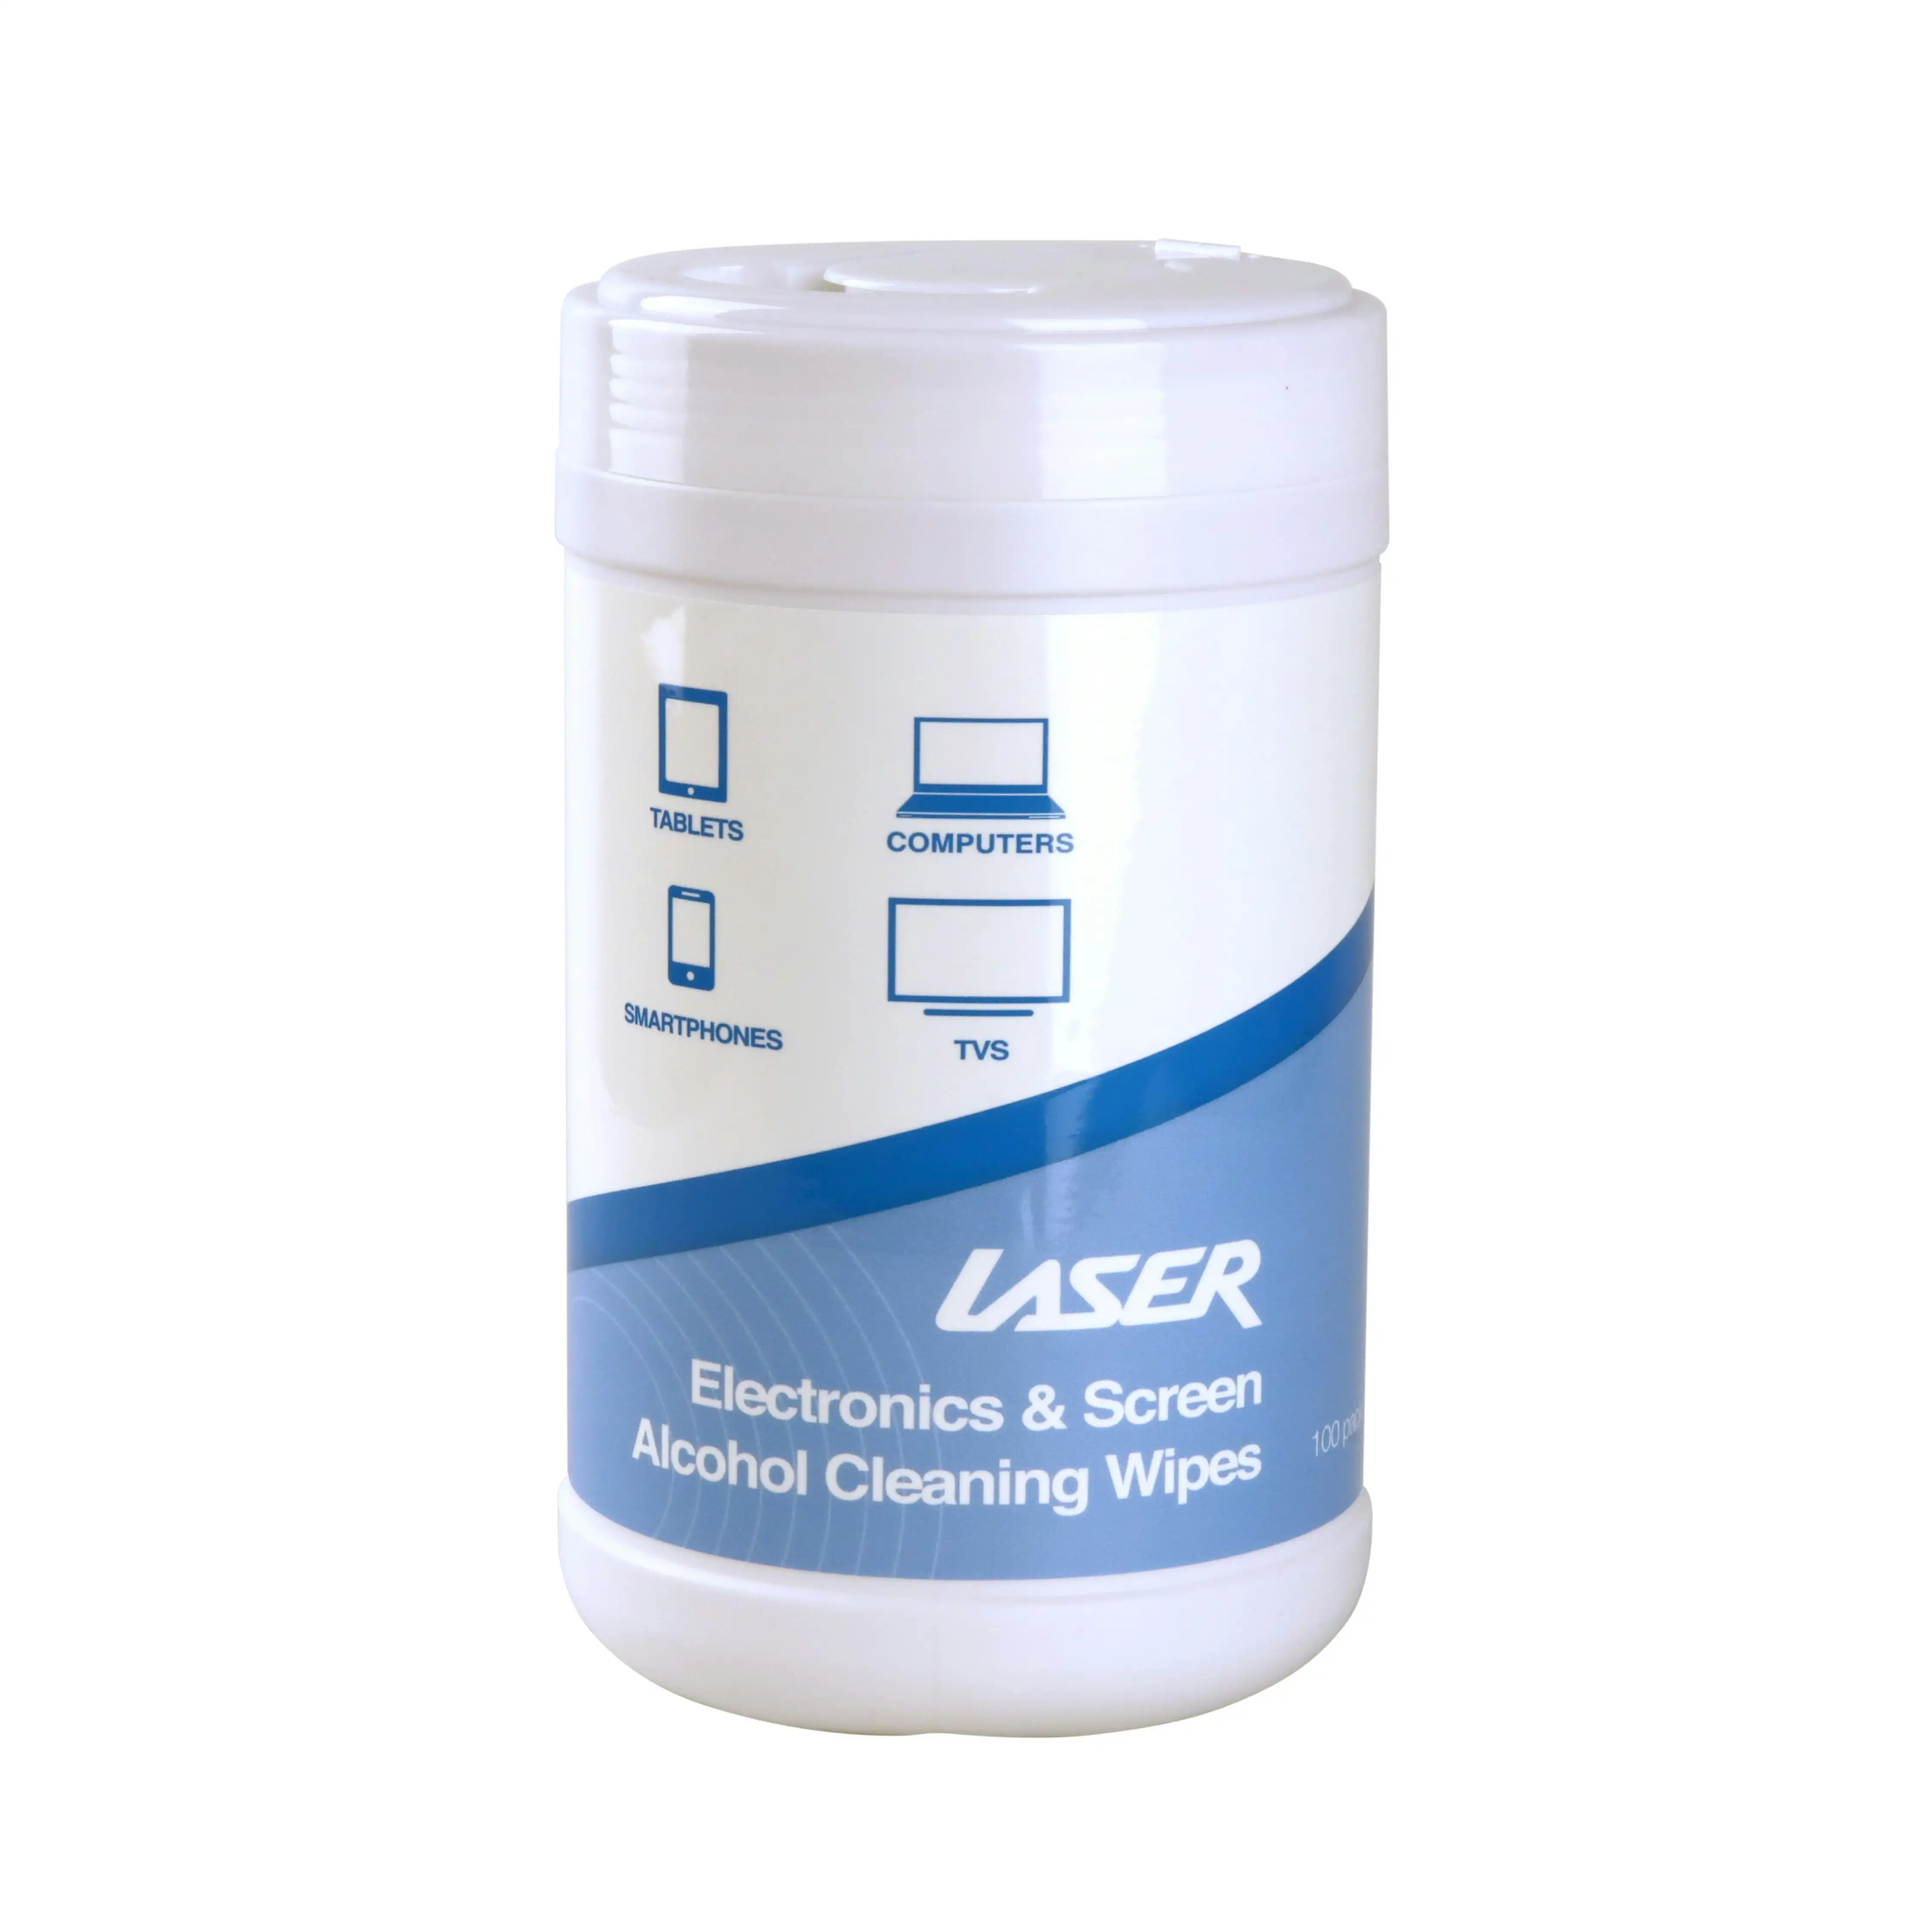 NEW Laser Anti Bacterial 100 Alcohol Cleaning Wipes